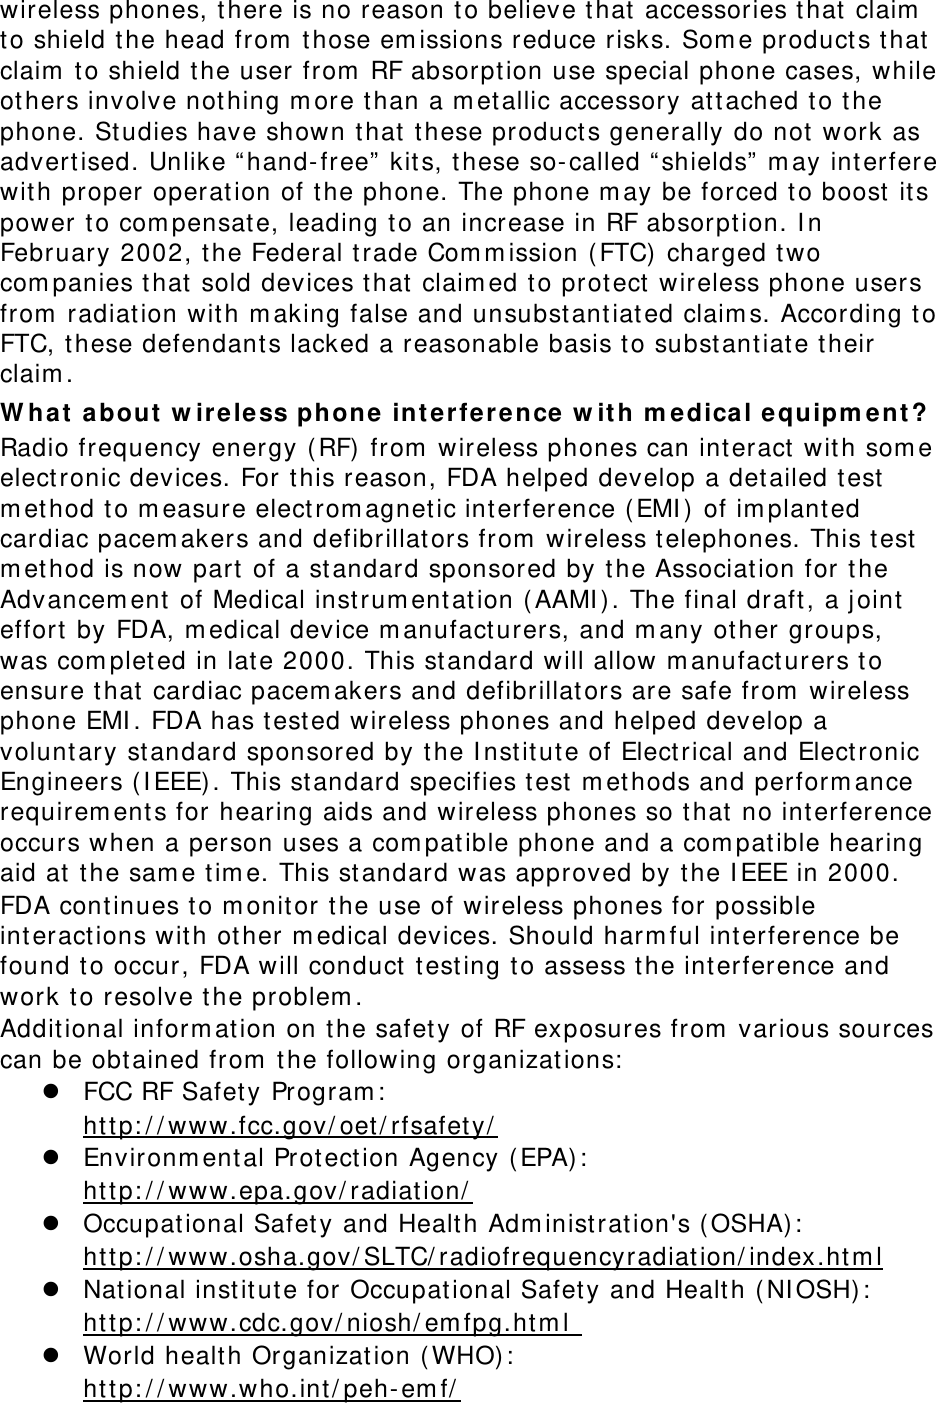 wireless phones, t here is no reason t o believe that accessories that claim  to shield t he head from  those em issions reduce risks. Som e products that claim  to shield t he user from  RF absorption use special phone cases, while others involve nothing m ore t han a m etallic accessory at tached to the phone. St udies have shown t hat these products generally do not work as advert ised. Unlike “ hand- free”  kit s, these so-called “ shields”  m ay int erfere with proper operation of t he phone. The phone m ay be forced t o boost  it s power t o com pensate, leading t o an increase in RF absorption. I n February 2002, t he Federal t rade Com m ission ( FTC) charged t wo com panies that sold devices t hat  claim ed t o prot ect  wireless phone users from  radiation wit h m aking false and unsubst ant iat ed claim s. According t o FTC, t hese defendant s lacked a reasonable basis t o subst antiate their claim . W ha t  about  w ir ele ss phone int erfer ence  w it h m edical equipm ent ? Radio frequency energy ( RF) from  wireless phones can int eract  wit h som e elect ronic devices. For this reason, FDA helped develop a detailed test m ethod t o m easure elect rom agnetic interference ( EMI )  of im planted cardiac pacem akers and defibrillators from  wireless telephones. This test  m ethod is now part of a st andard sponsored by the Association for t he Advancem ent  of Medical inst rum entat ion ( AAMI ) . The final draft , a j oint  effort  by FDA, m edical device m anufacturers, and m any other groups, was com plet ed in late 2000. This st andard will allow m anufact urers t o ensure that cardiac pacem akers and defibrillat ors are safe from  wireless phone EMI . FDA has t est ed wireless phones and helped develop a voluntary st andard sponsored by t he I nst itute of Electrical and Electronic Engineers ( I EEE) . This st andard specifies t est  m ethods and perform ance requirem ent s for hearing aids and wireless phones so t hat no interference occurs when a person uses a com patible phone and a com patible hearing aid at t he sam e tim e. This st andard was approved by the I EEE in 2000. FDA continues t o m onitor the use of wireless phones for possible int eractions wit h other m edical devices. Should harm ful int erference be found t o occur, FDA will conduct  t est ing to assess the int erference and work to resolve the problem . Additional inform ation on the safety of RF exposures from  various sources can be obtained from  t he following organizations:   FCC RF Safety Program :   http: / / www.fcc.gov/ oet / rfsafety/   Environm ent al Protection Agency (EPA) :   http: / / www.epa.gov/ radiat ion/   Occupational Safety and Health Adm inistrat ion&apos;s ( OSHA):          ht t p: / / www.osha.gov/ SLTC/ radiofrequencyradiat ion/ index.htm l  National inst itut e for Occupational Safety and Health ( NI OSH) :   http: / / www.cdc.gov/ niosh/ em fpg.ht m l   World healt h Organizat ion ( WHO) :   http: / / www.who.int / peh- em f/  